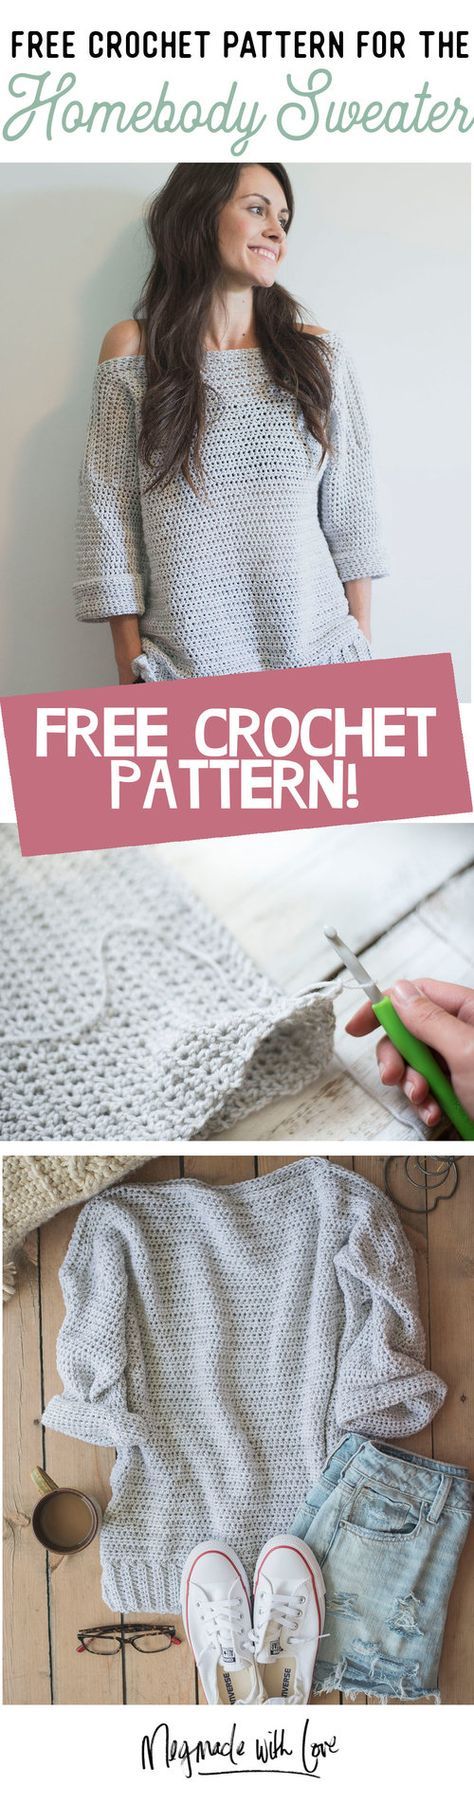 Free Crochet Pattern for The Homebody Sweater (Easy, Comfy and Cute!)